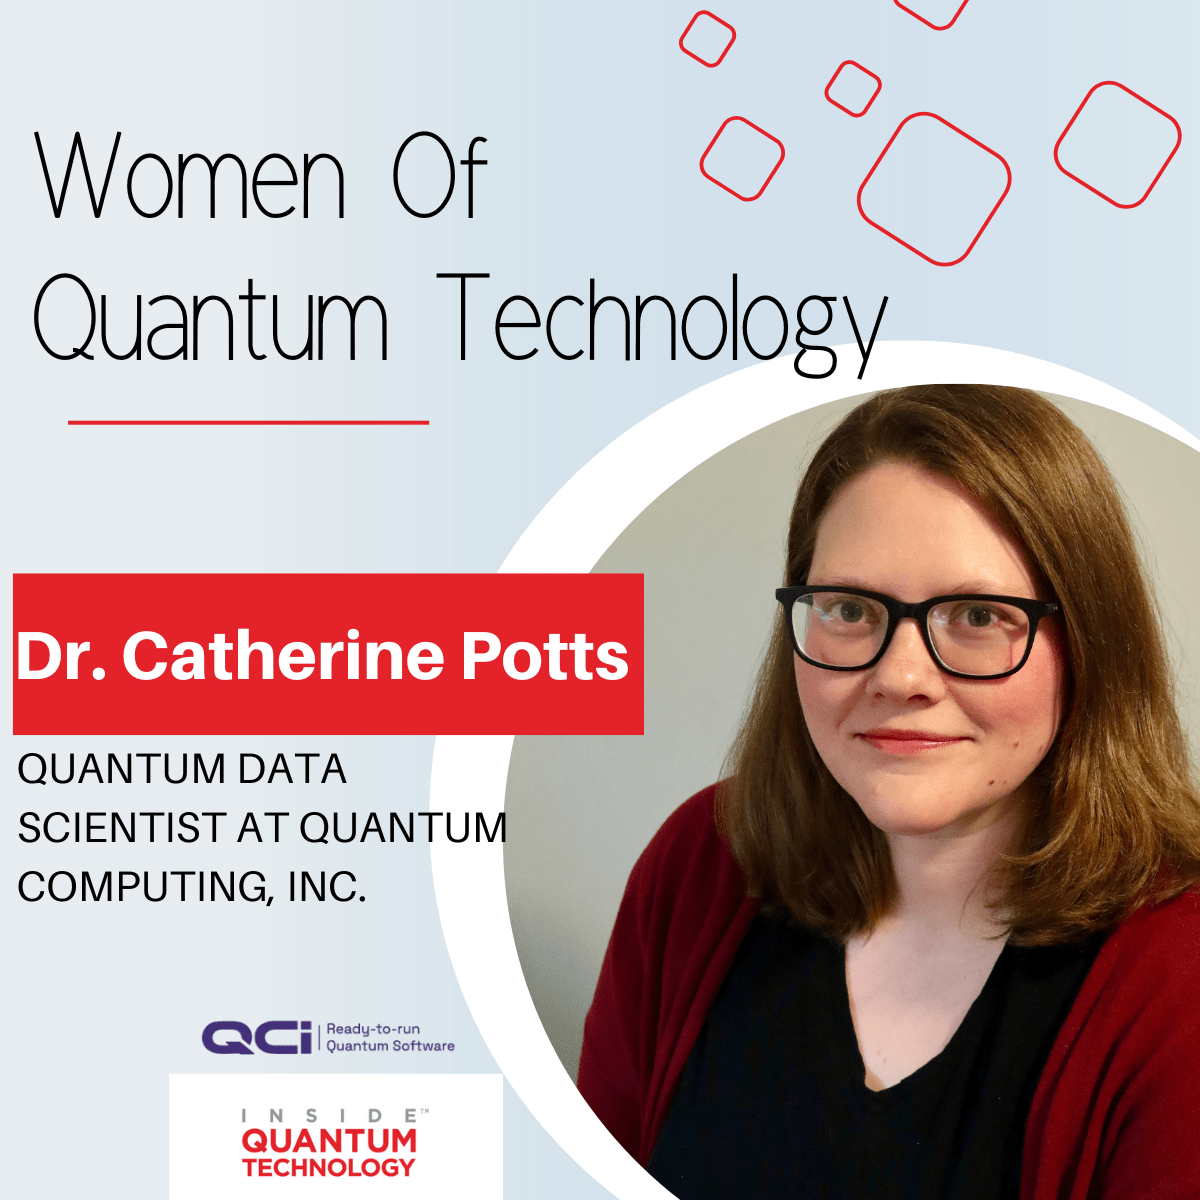 Dr. Catherine Potts of Quantum Computing Inc. talks about transitioning into the quantum industry and ways to make this field more diverse.